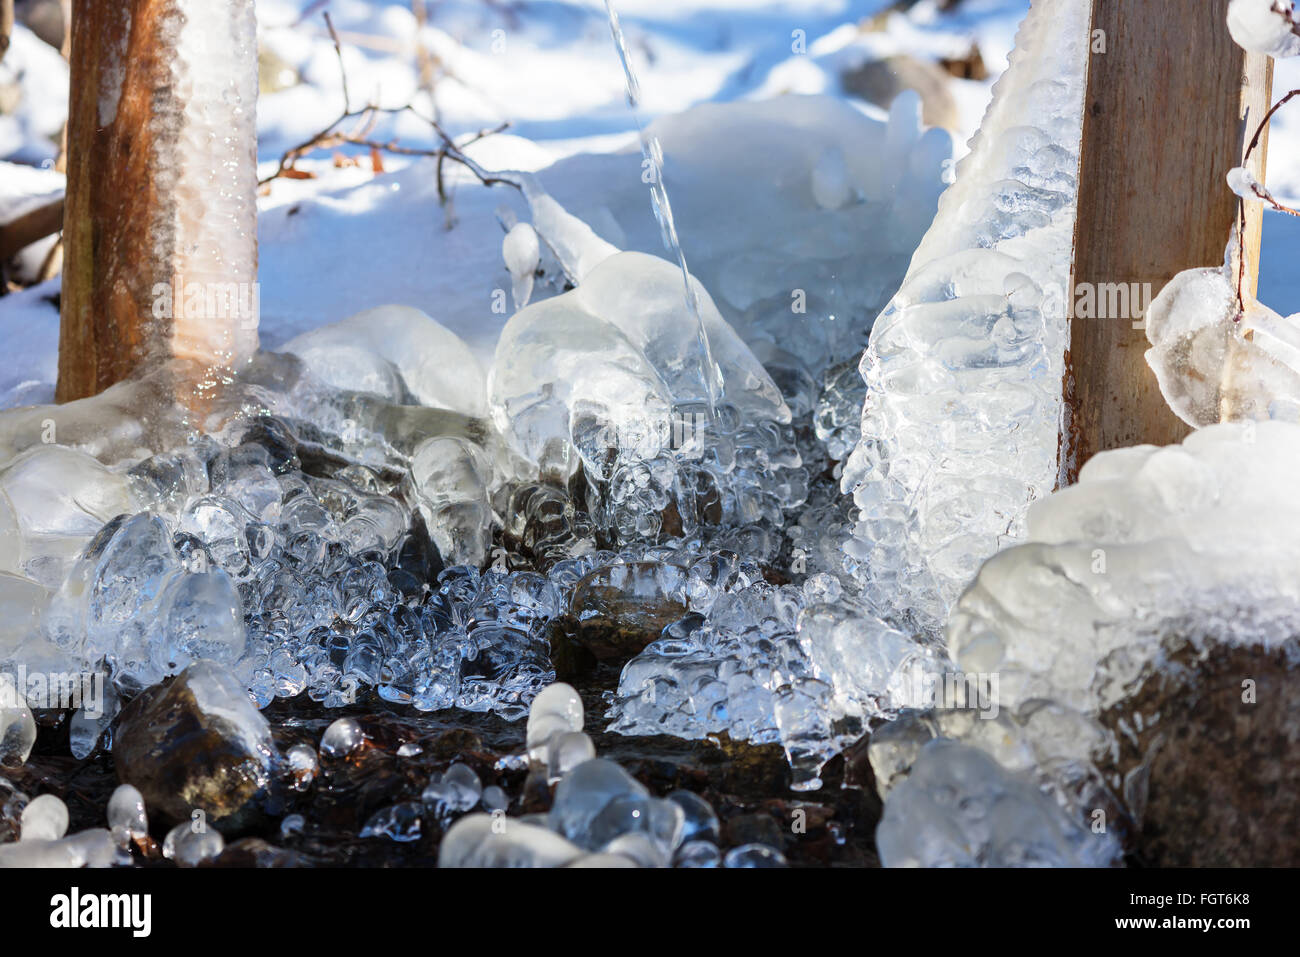 Abstract ice formation in warm weather when it starts to melt and get smooth on the surface. Stock Photo